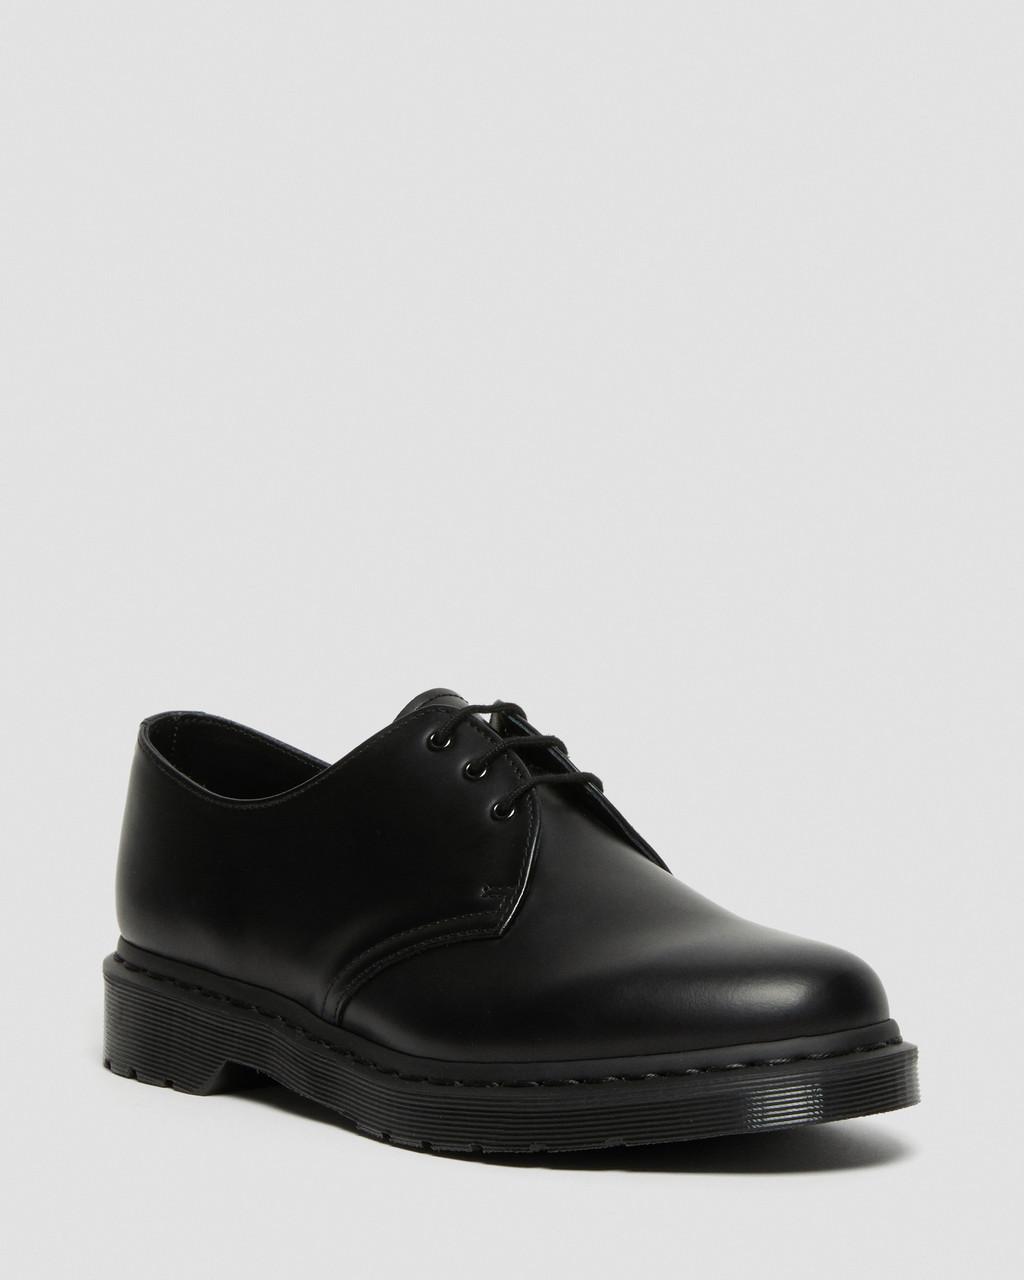 Dr. Martens 1461 Mono Smooth Leather Oxford Shoes in Black | Lyst